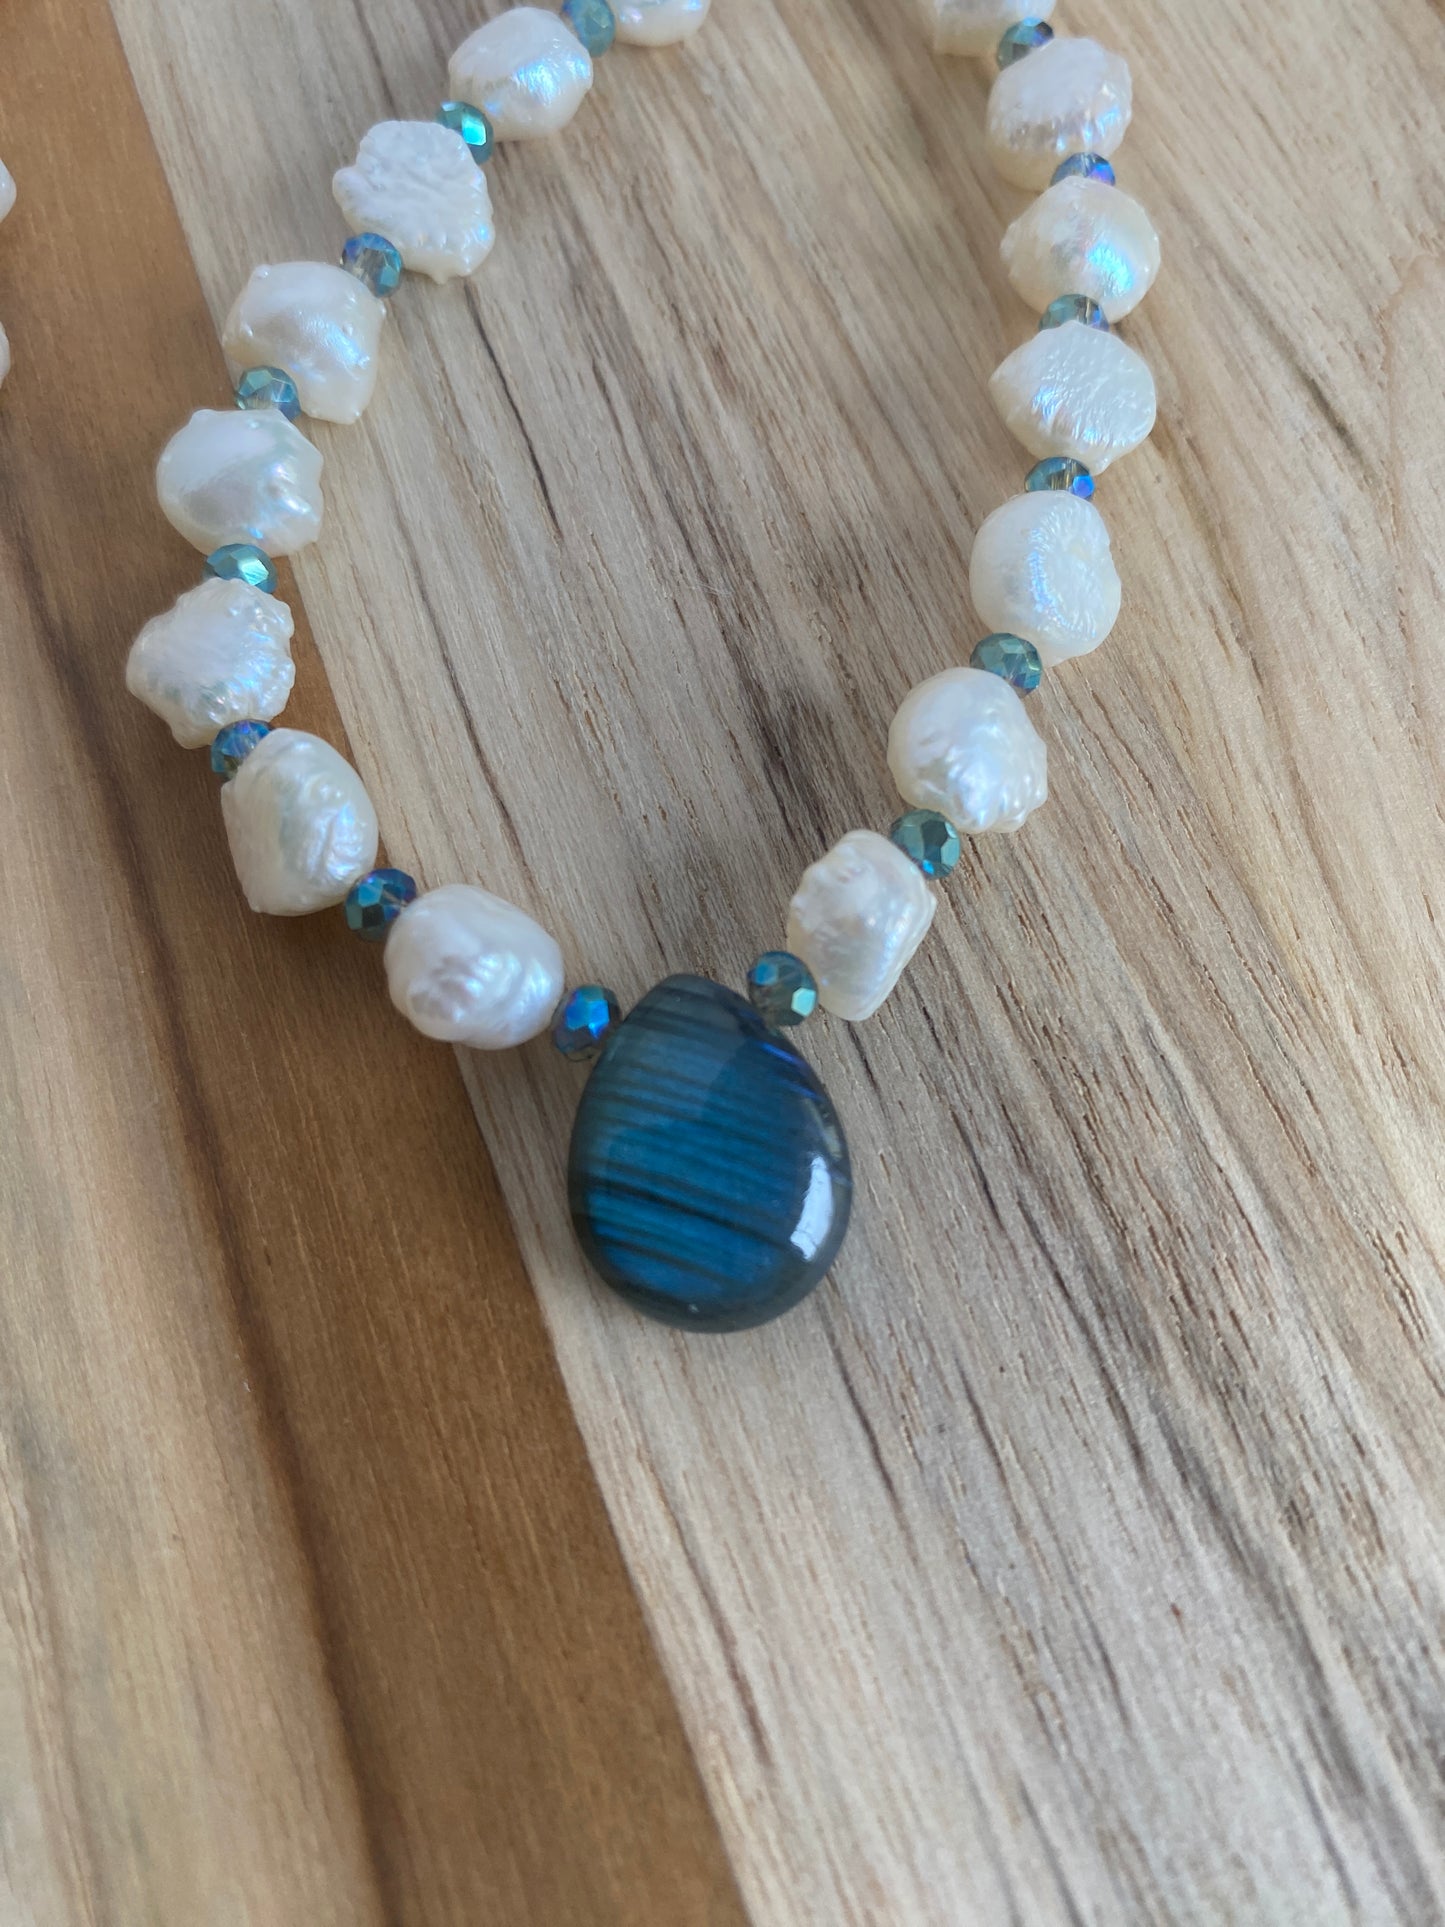 White Freshwater Pearl with Labradorite Pendant Bead and Crystals